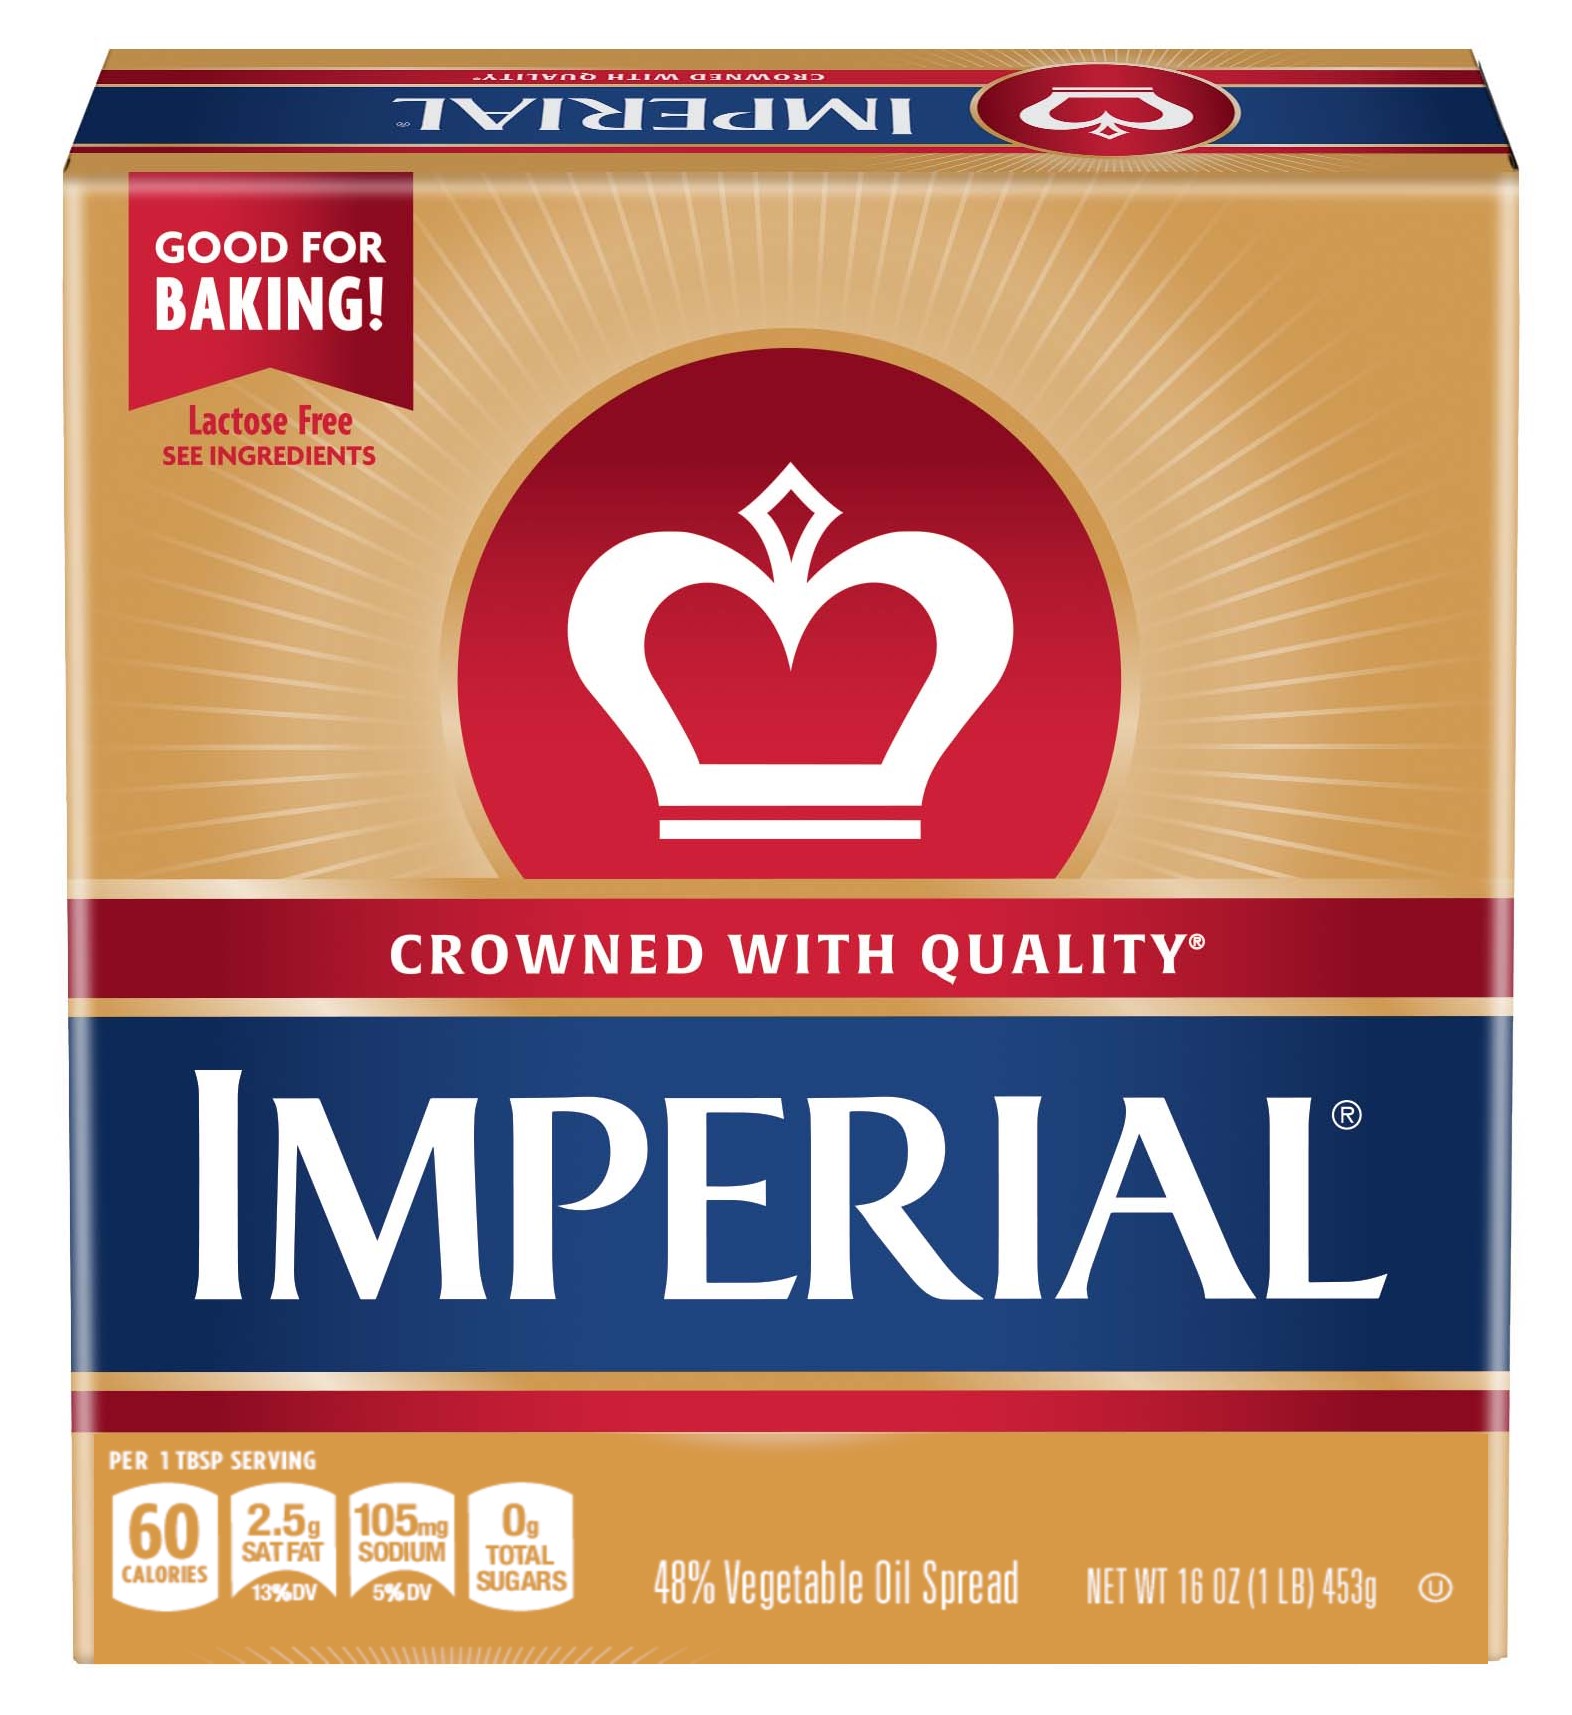 Imperial Vegetable Oil Spread, 16 oz Box, 4 Sticks (Refrigerated) - image 1 of 7